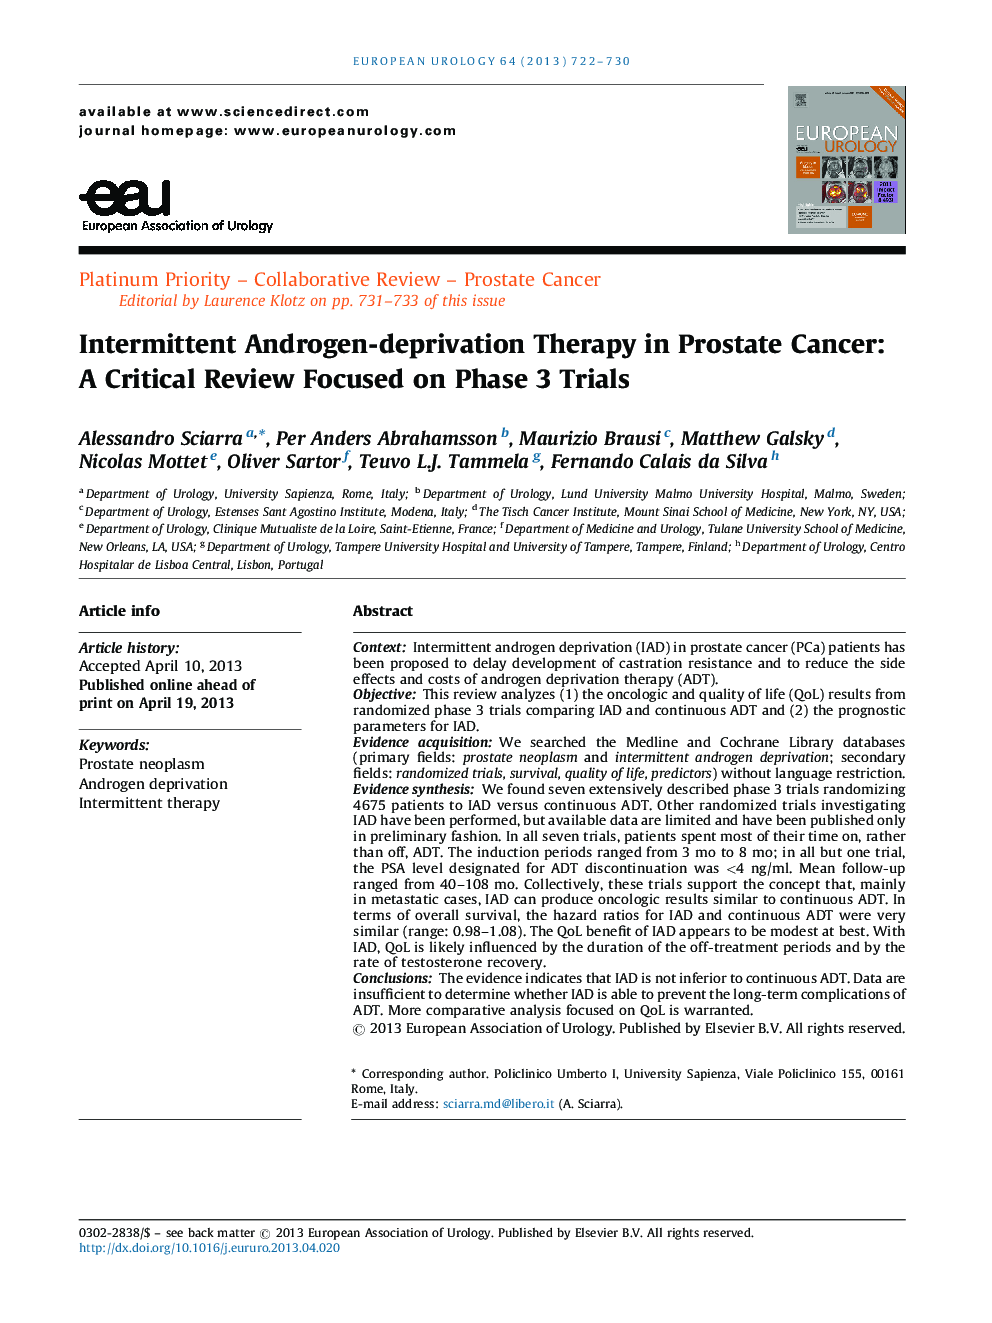 Intermittent Androgen-deprivation Therapy in Prostate Cancer: A Critical Review Focused on Phase 3 Trials